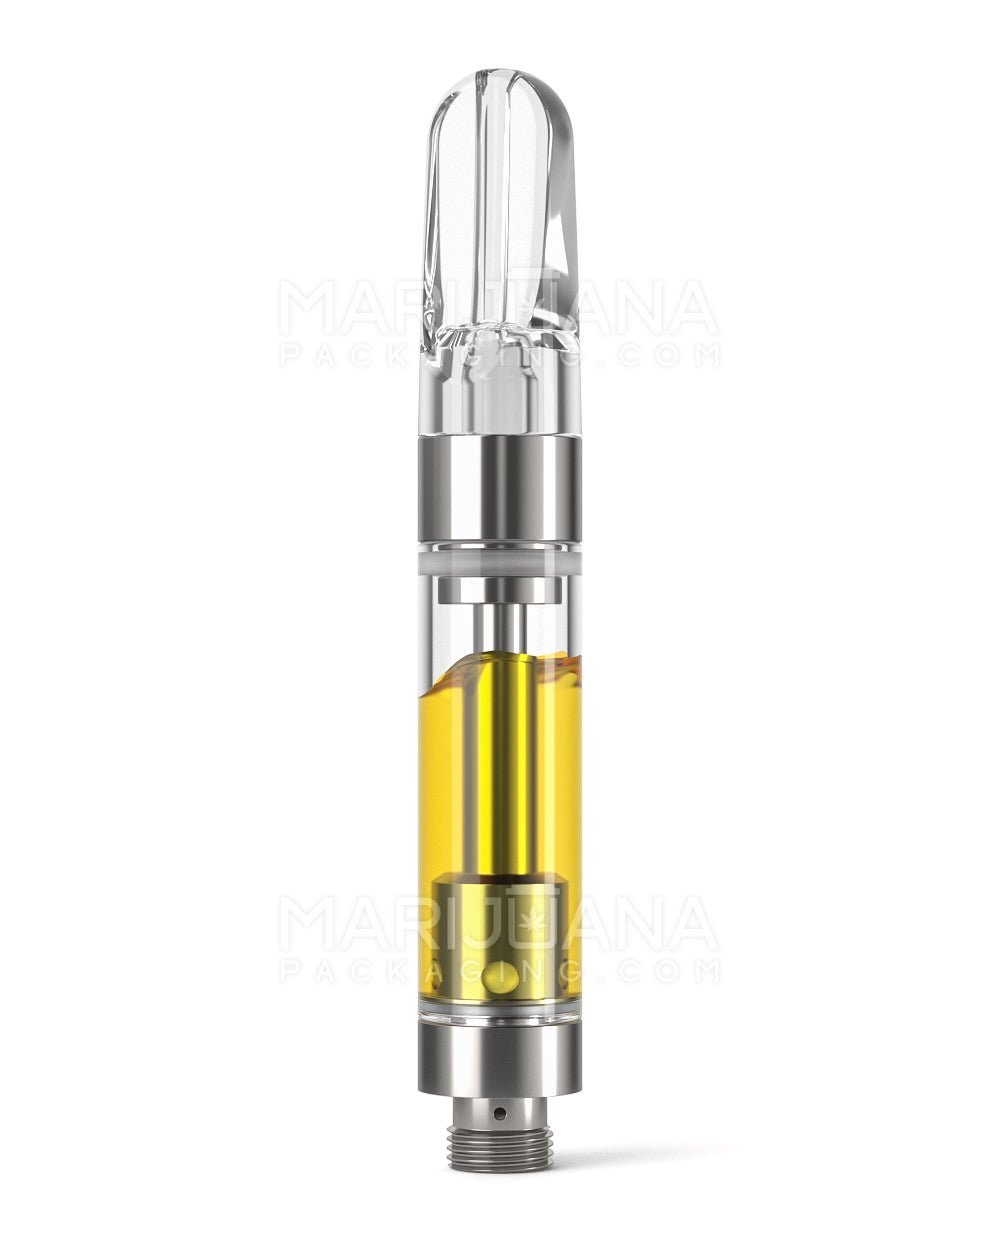 Ceramic Core Glass Vape Cartridge with Flat Clear Plastic Mouthpiece | 1mL - Press On - 100 Count - 2